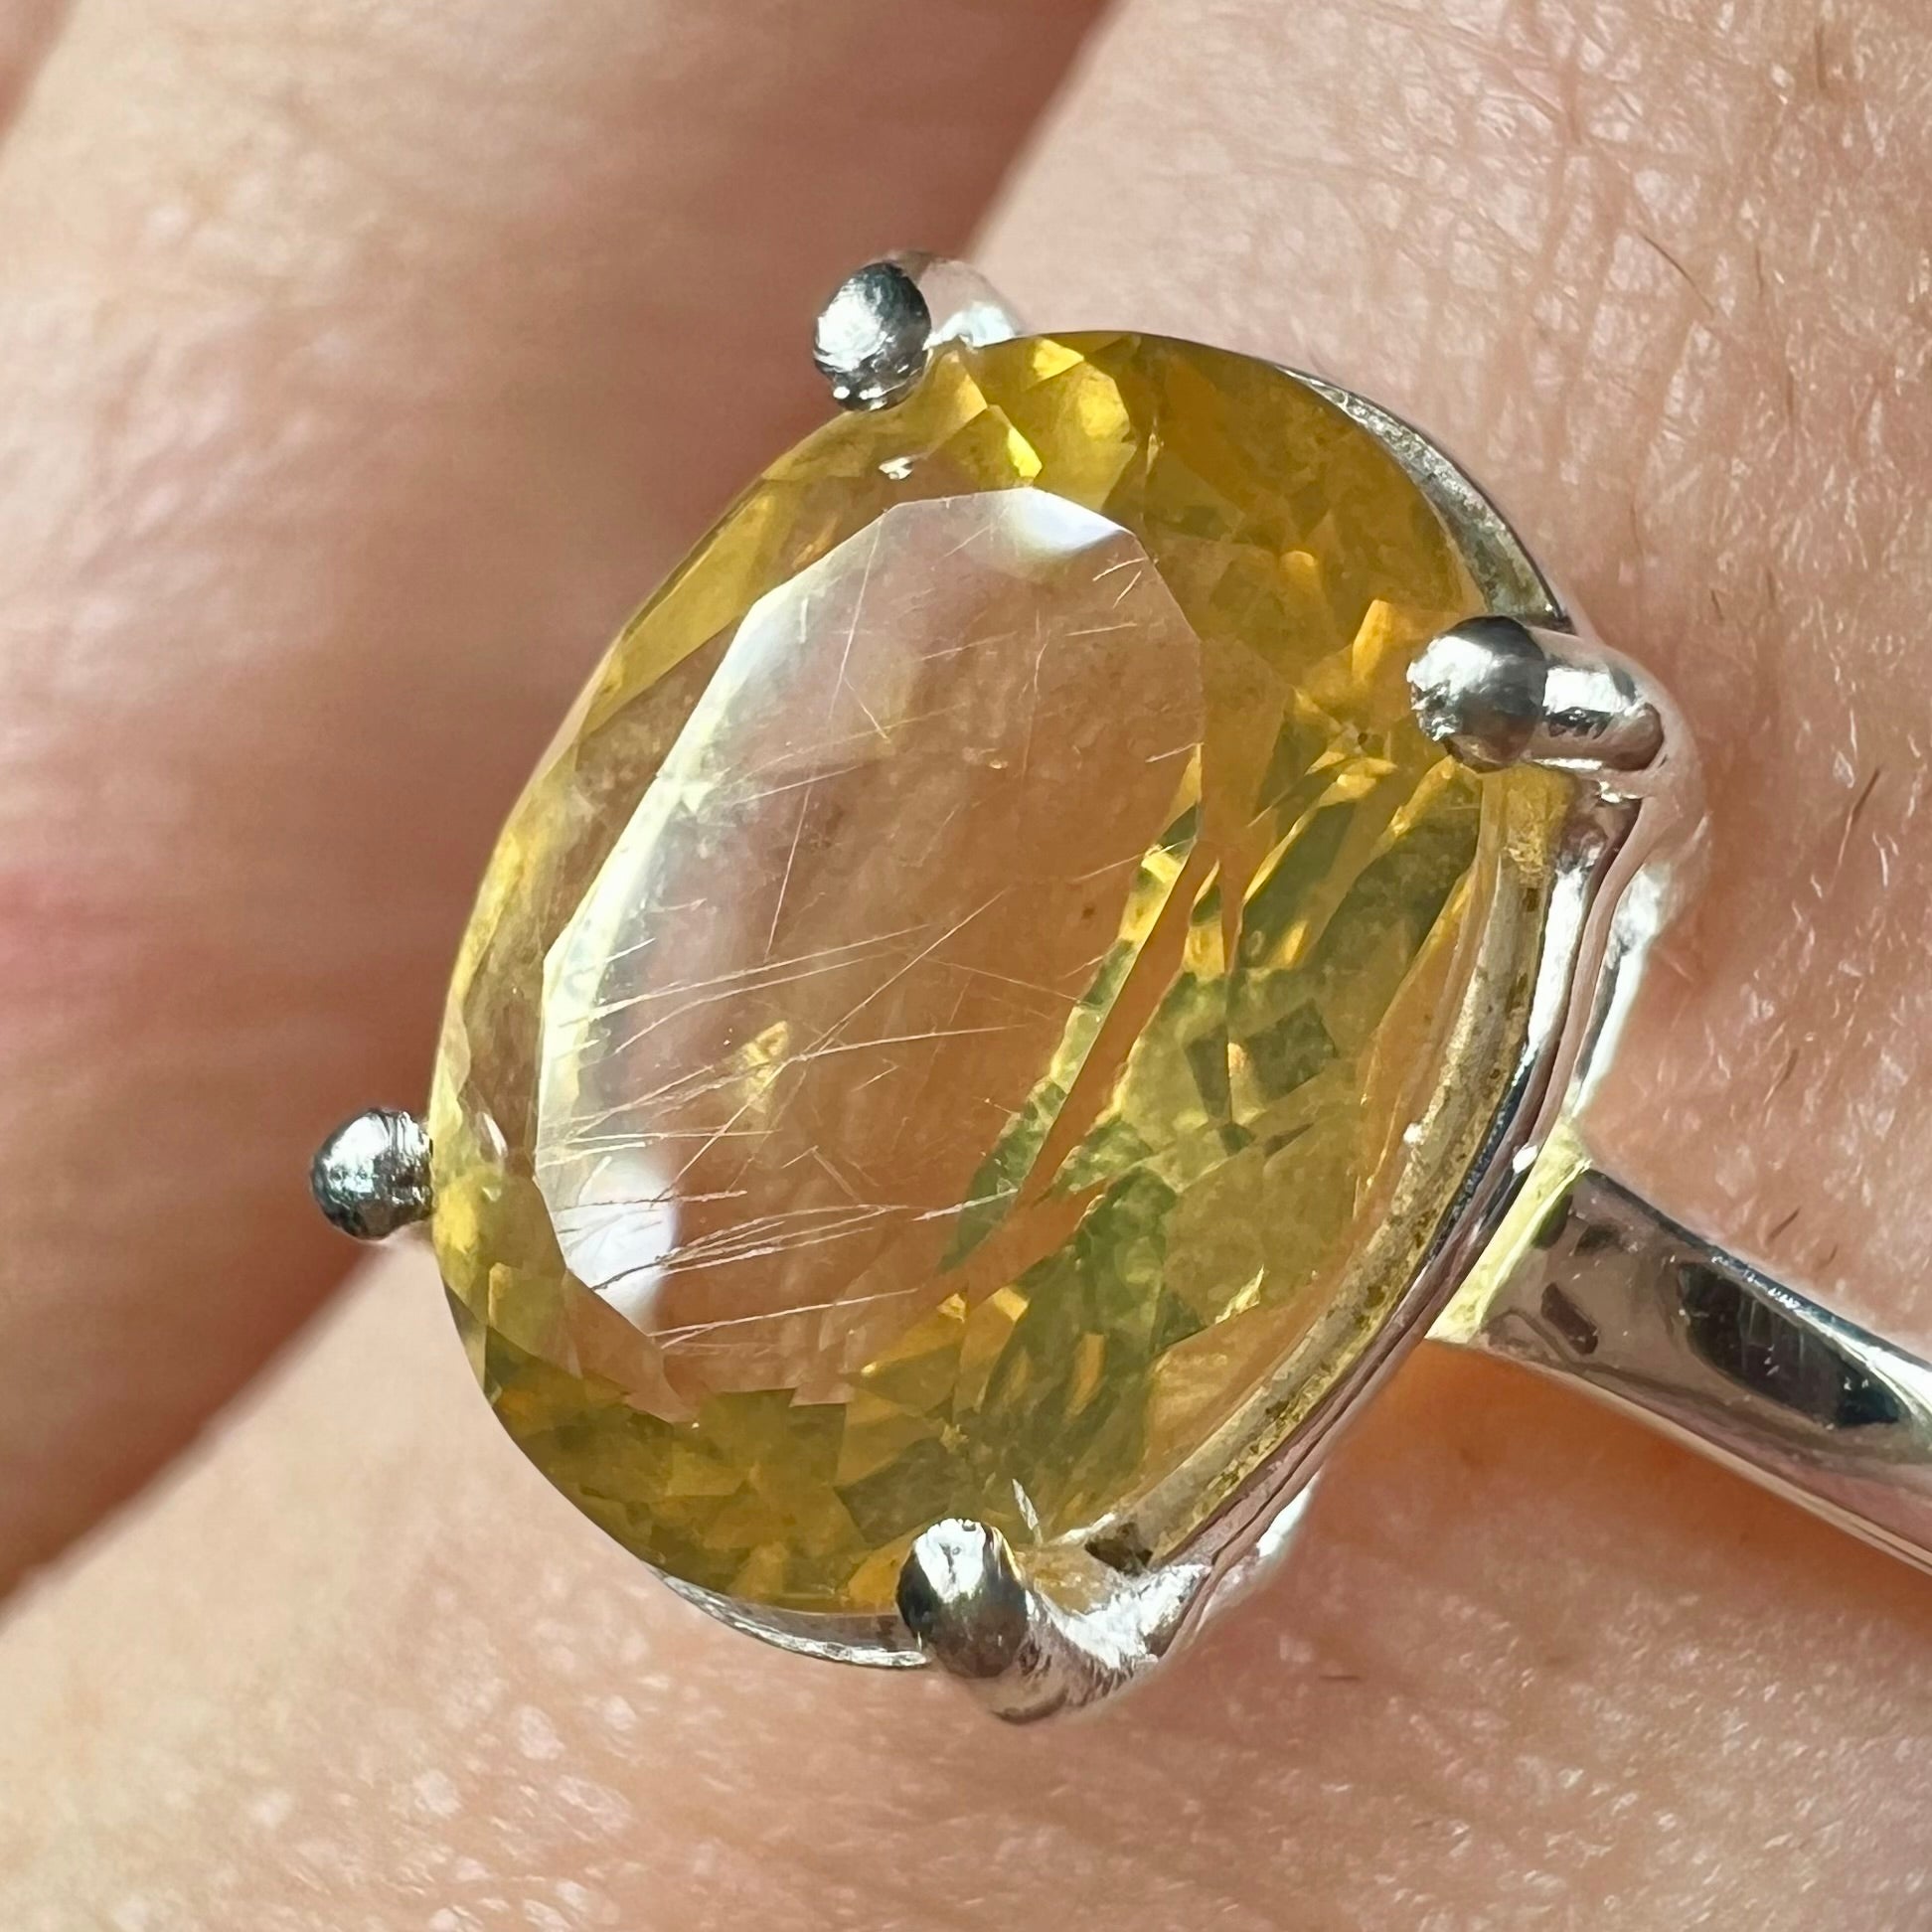 A silver solitaire ring prong-set with a natural, faceted oval cut Mexican fire opal.  The stone is a light yellow color.